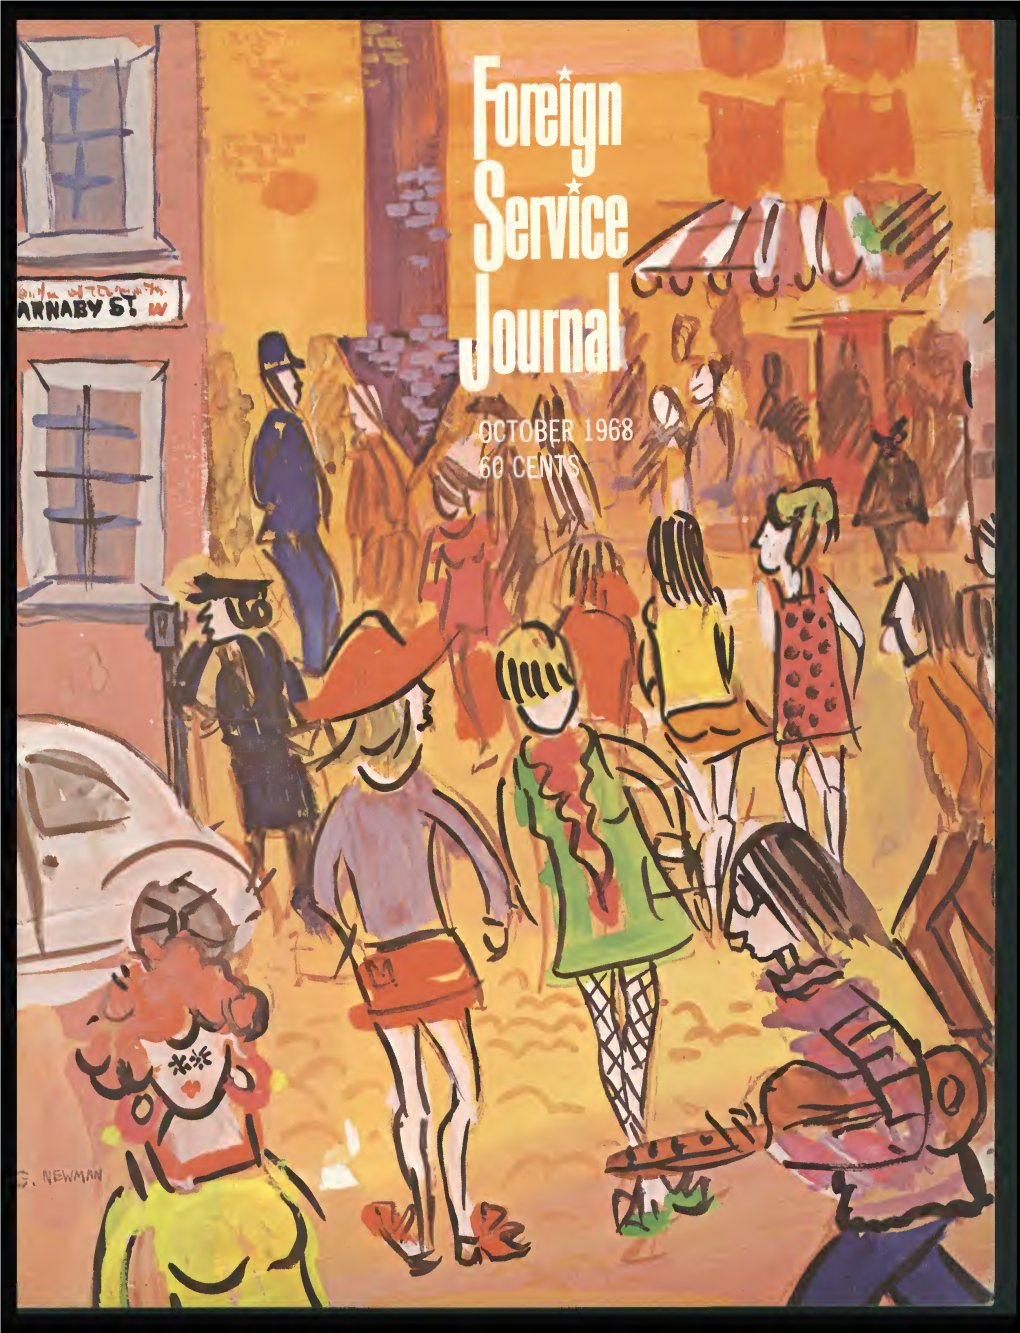 The Foreign Service Journal, October 1968